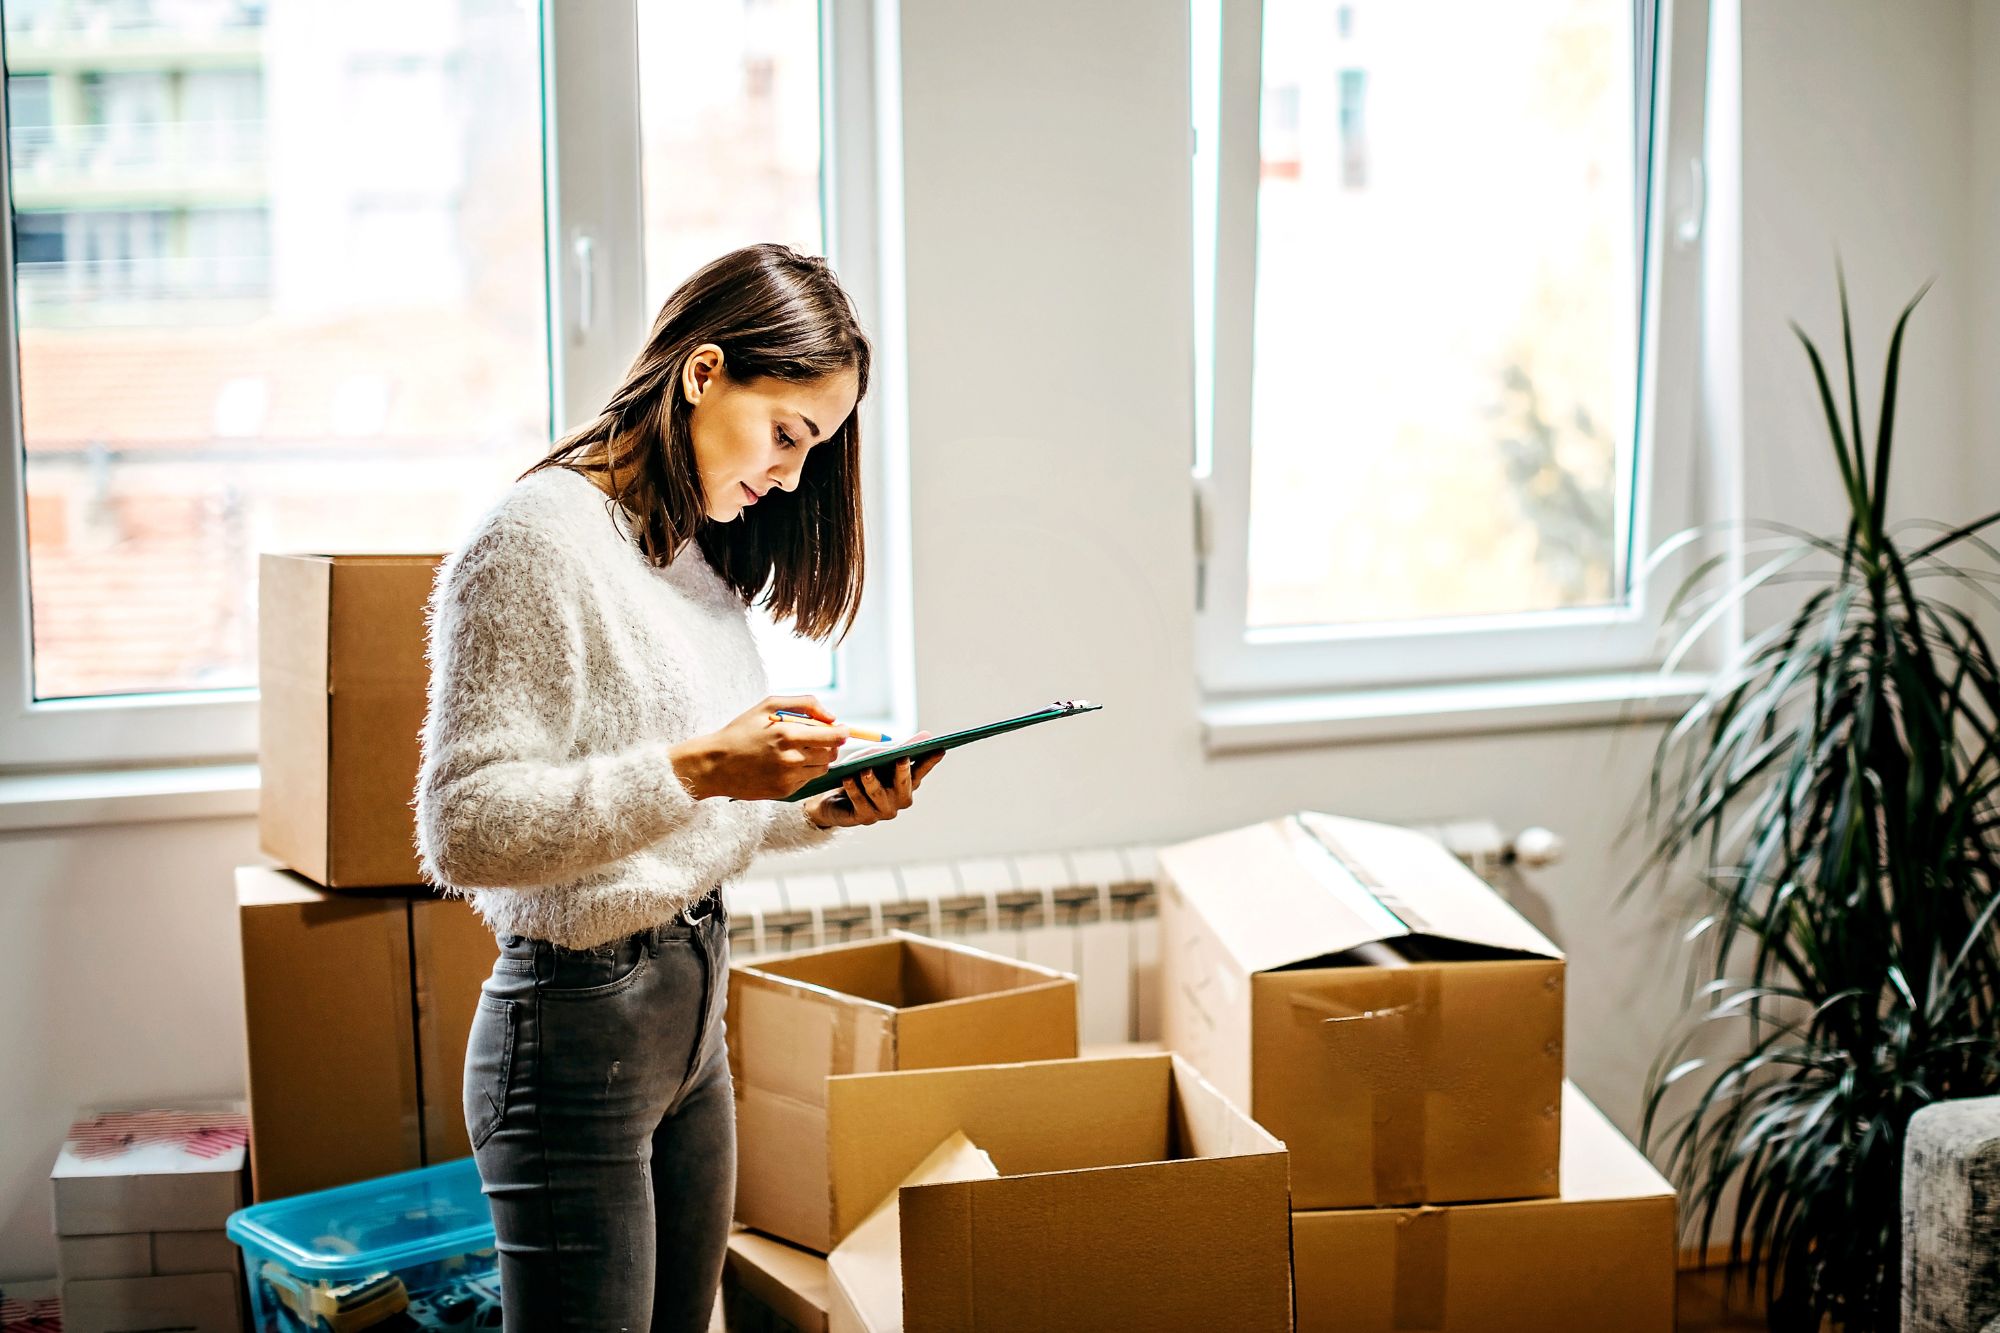 Items to simplify your move into a new home - Costello Realty